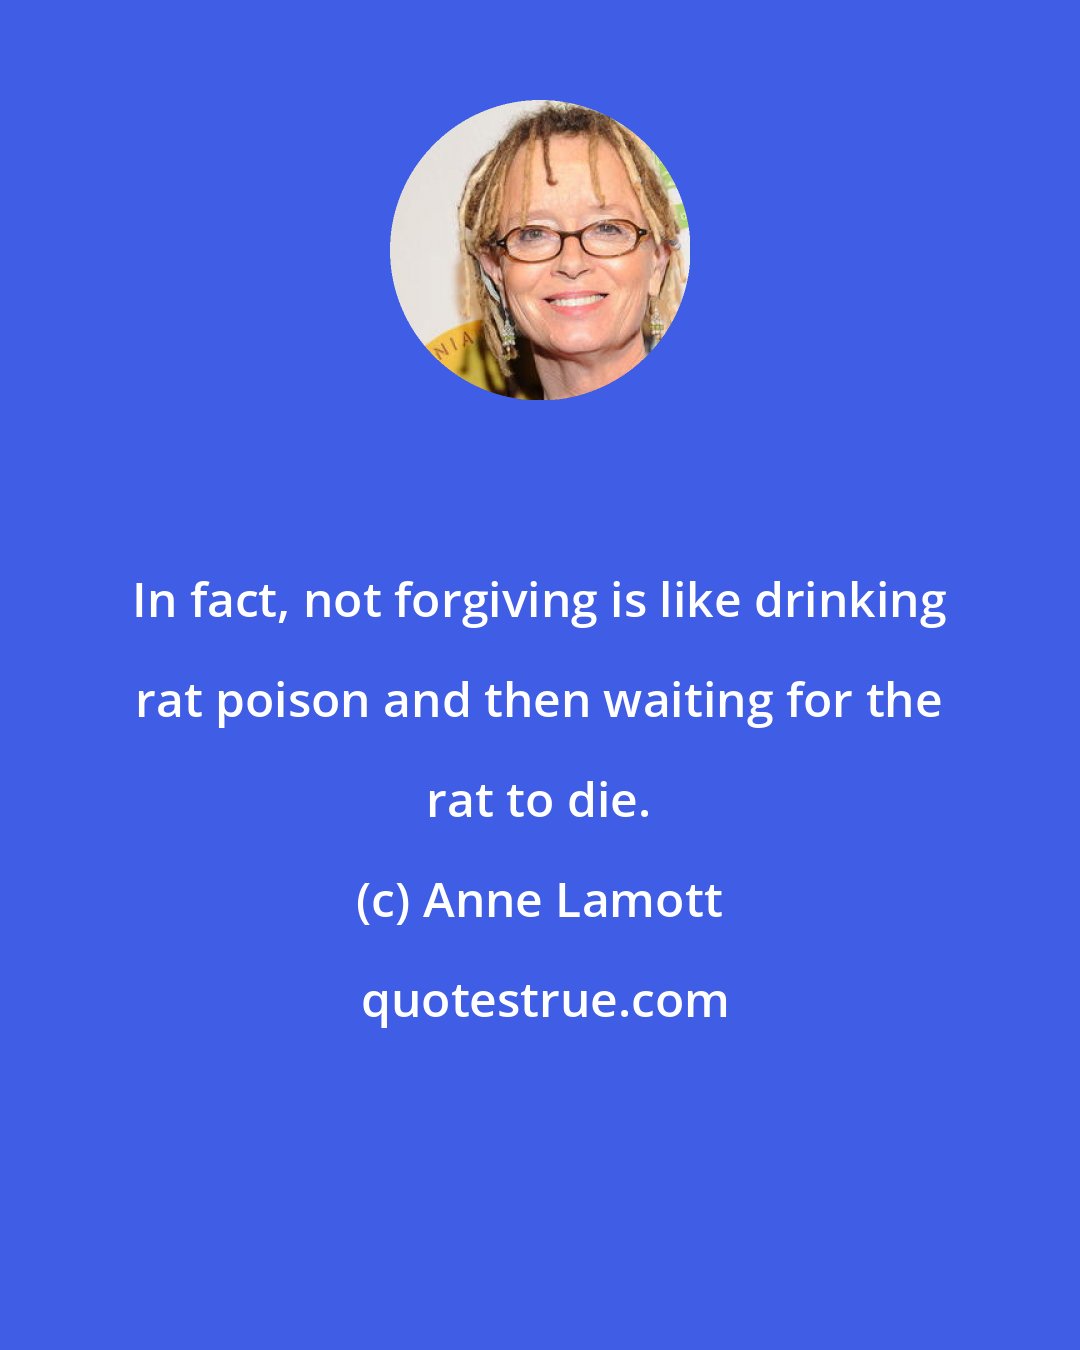 Anne Lamott: In fact, not forgiving is like drinking rat poison and then waiting for the rat to die.